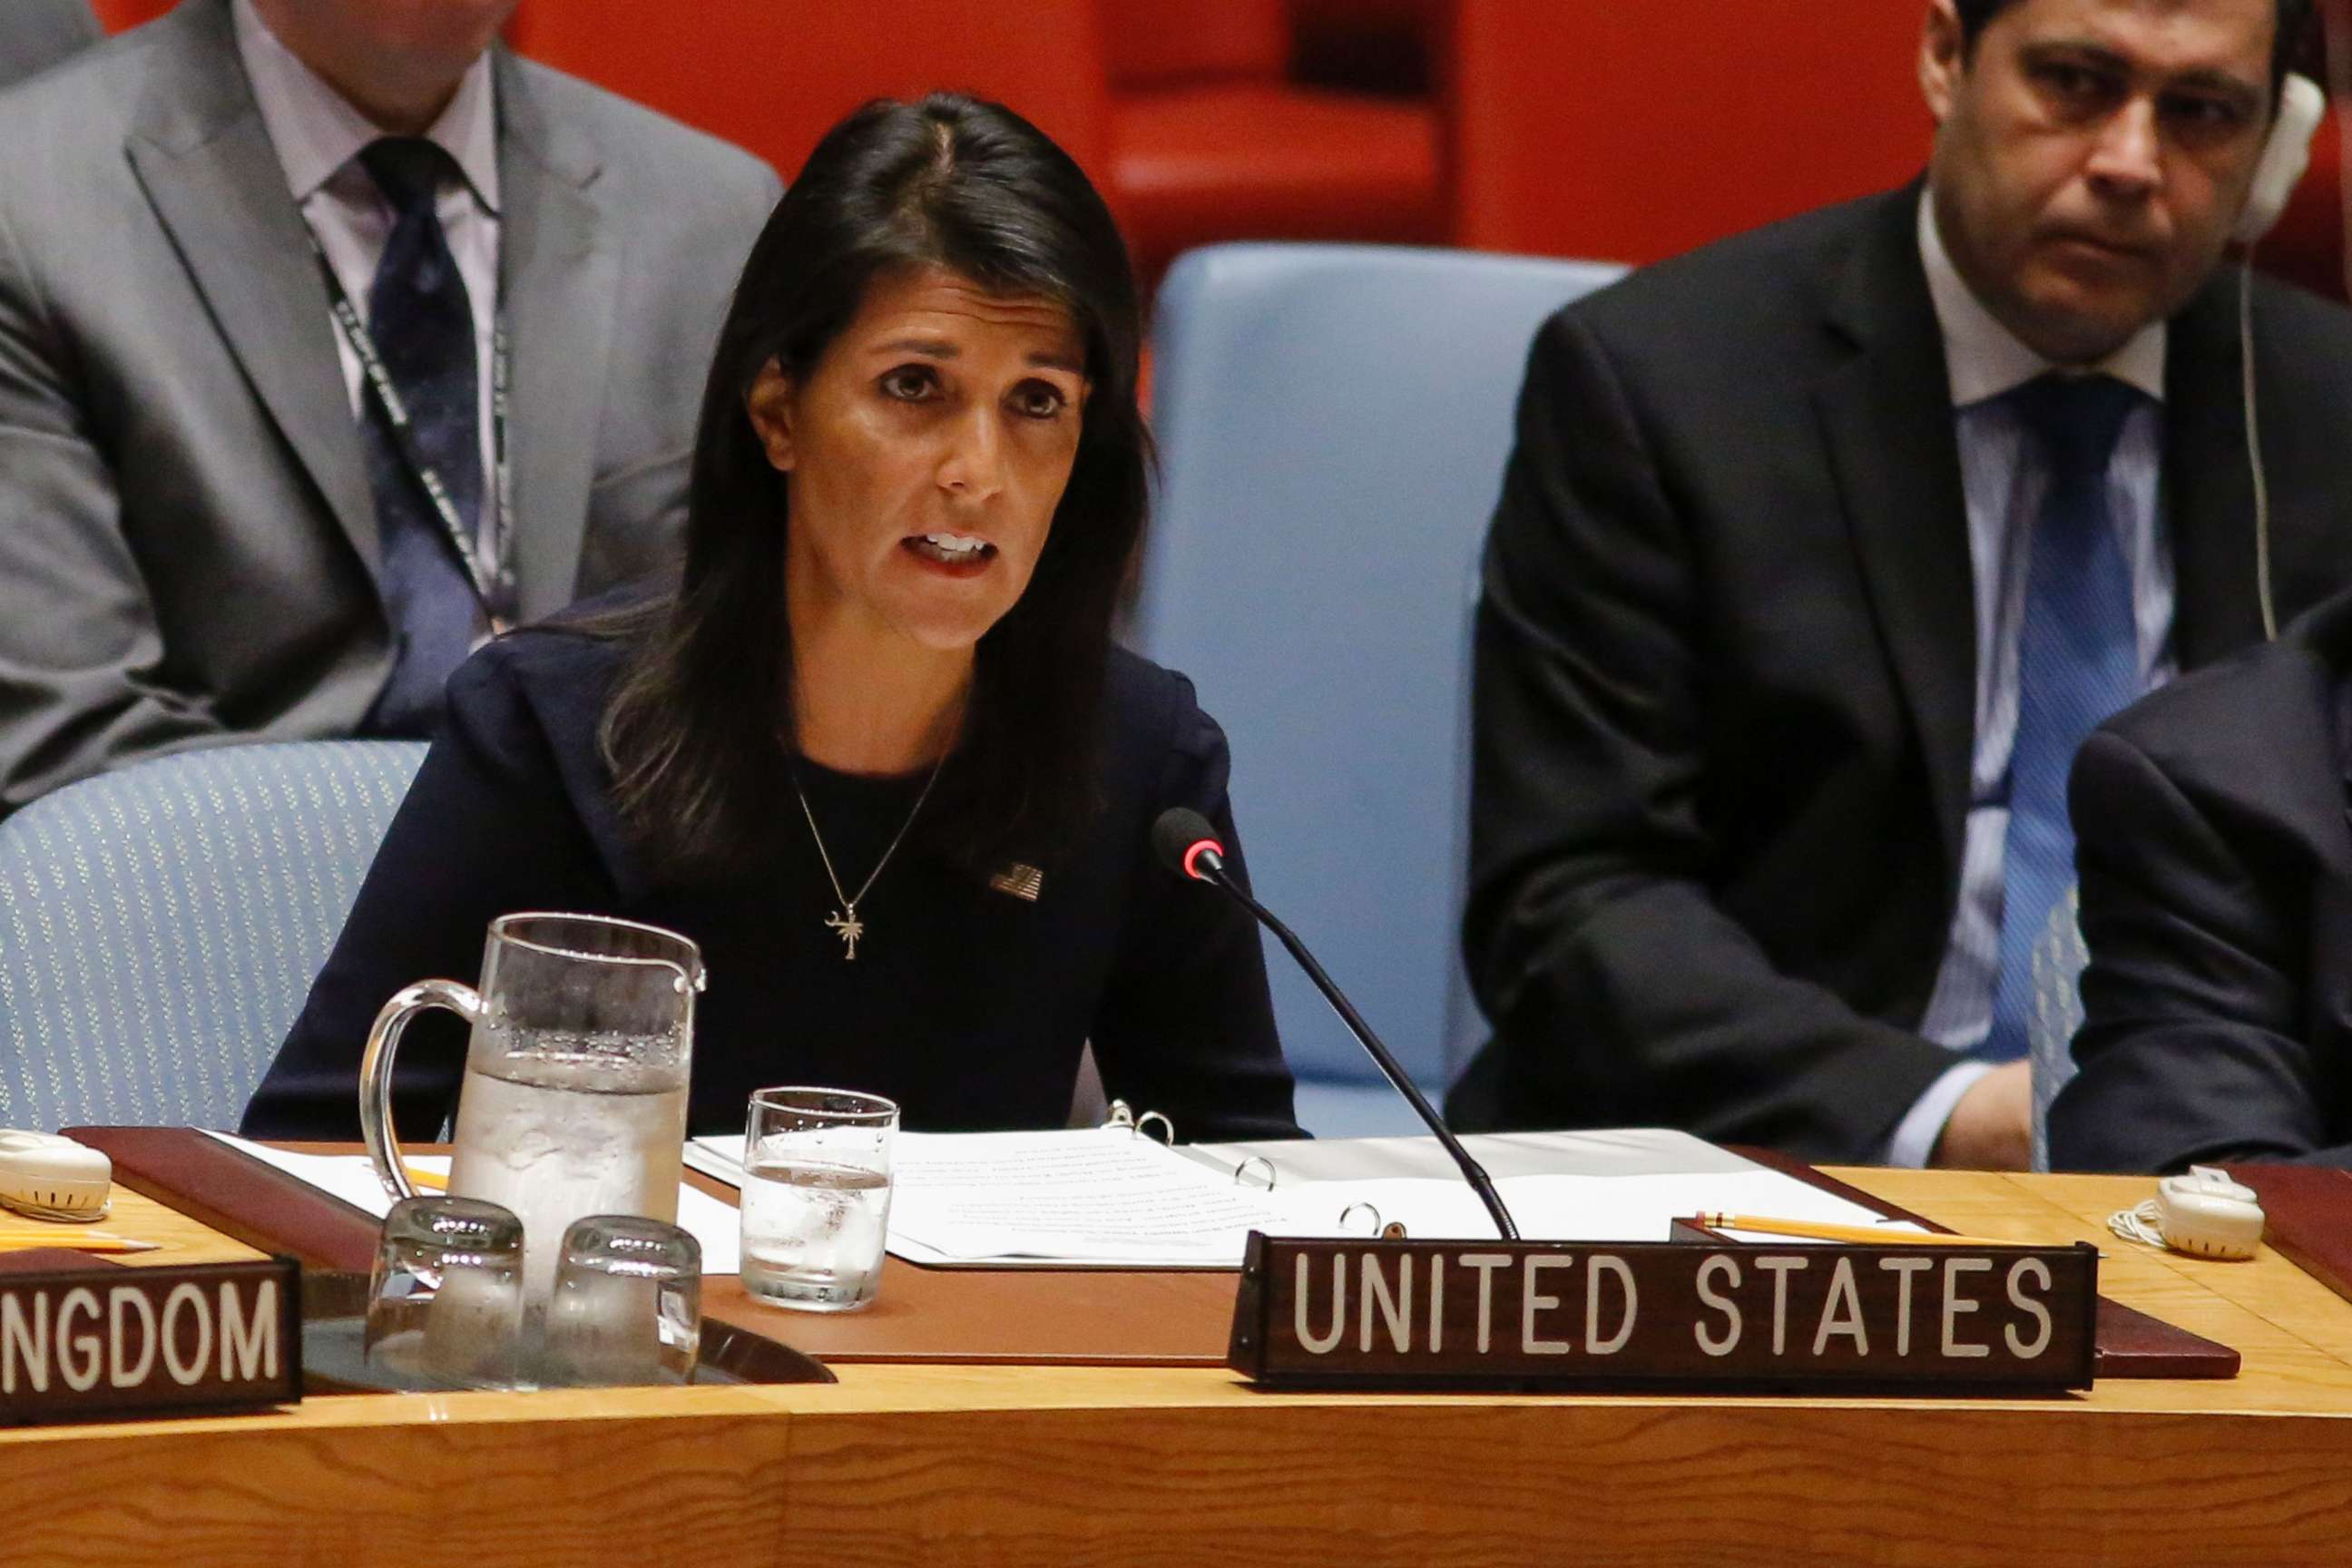 PHOTO: United States Ambassador to the United Nations Nikki Haley speaks during a UN Security Council emergency meeting over North Korea's latest missile launch, on September 4, 2017 at UN Headquarters in New York.
